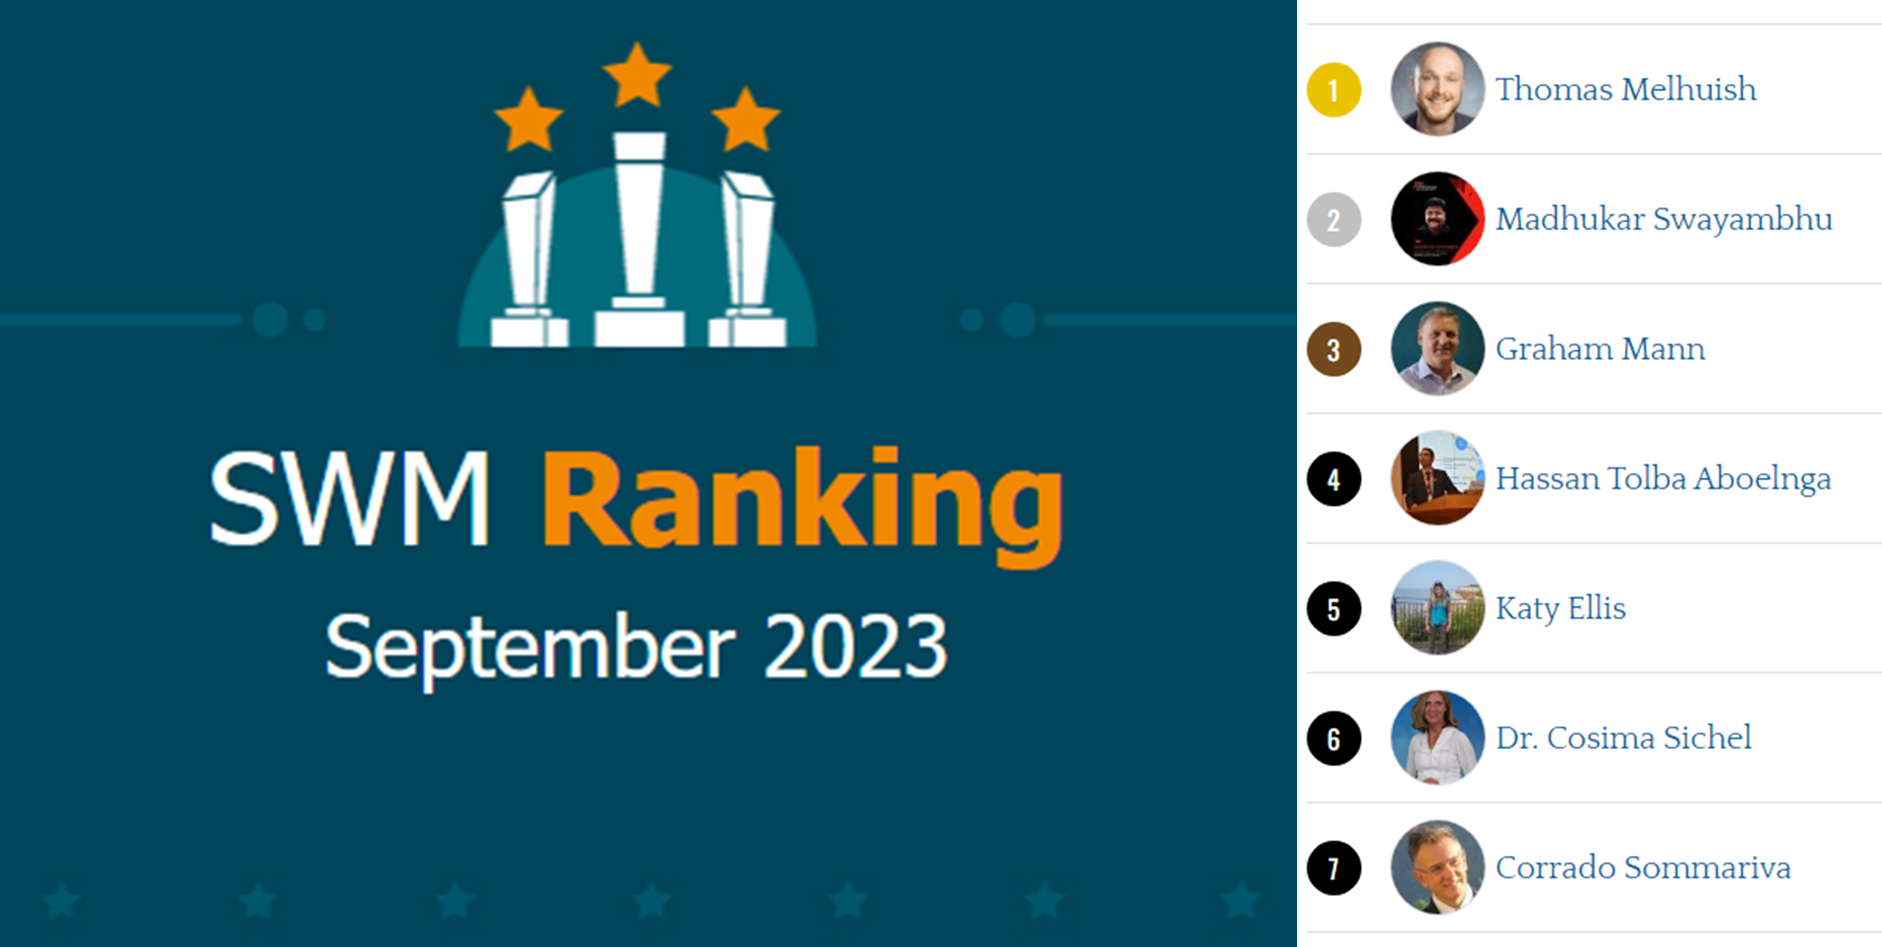 We are honored and splendid to share that in the Global Ranking of Smart Water Magazine, Spain for September, 2023, we&rsquo;ve Ranked 2nd and happe...